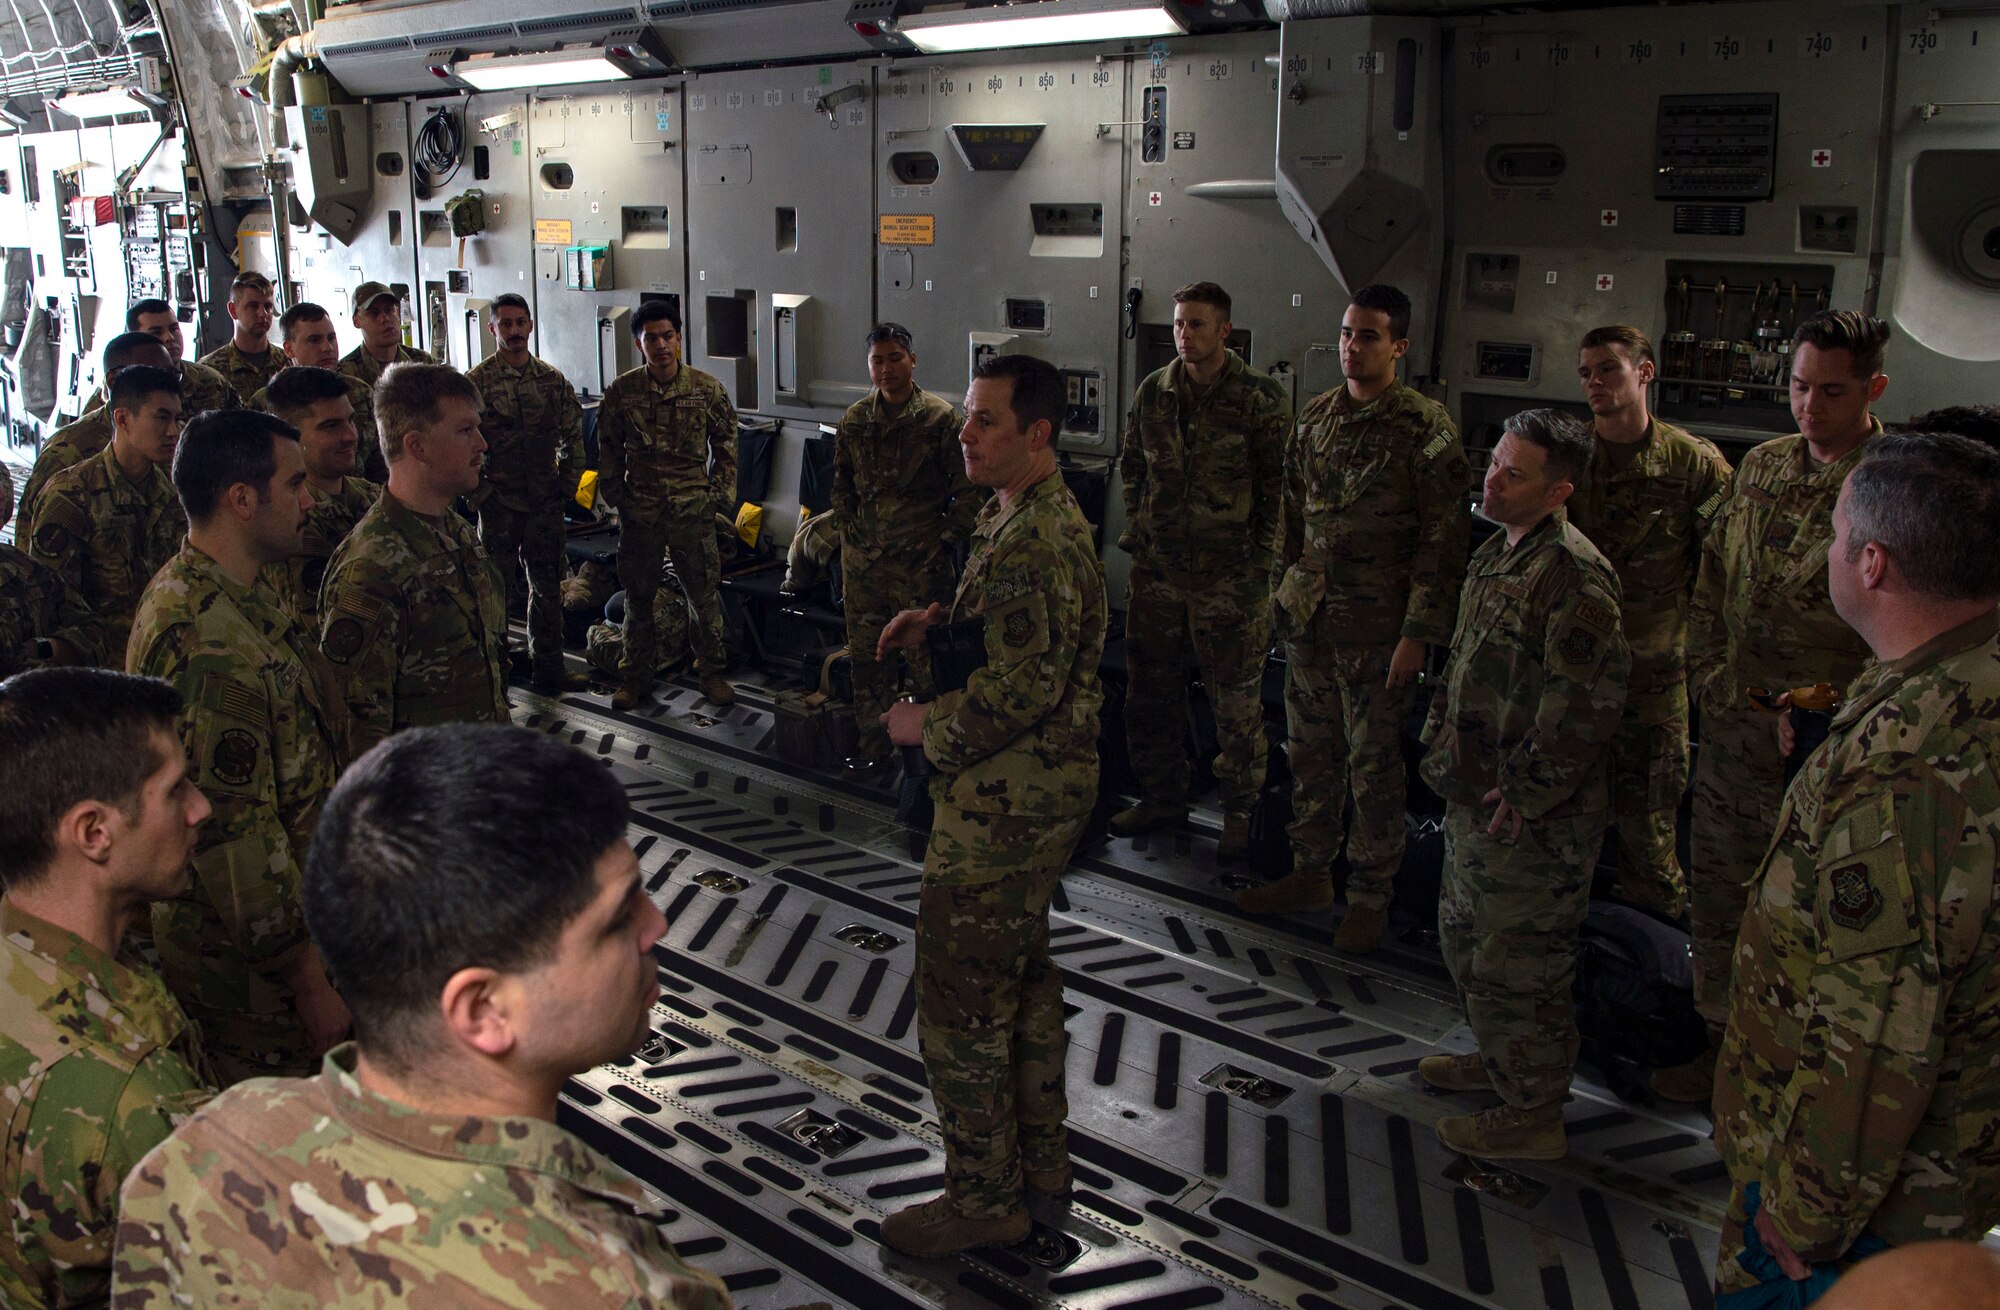 U.S. Air Force Lt. Col. Patrick McLaughlin, 816th Expeditionary Airlift Squadron commander, greets incoming deploying Airman on a C-17 Globemaster III at Al Udeid Air Base, Qatar, Nov. 29, 2021. Airmen assigned to Joint Base Lewis-McChord, Washington, and other Air Mobility Command C-17 bases periodically switch outgoing deploying Airmen for incoming ones in what is known as the EAS swap out. (U.S. Air Force photo by Staff Sgt. Tryphena Mayhugh)